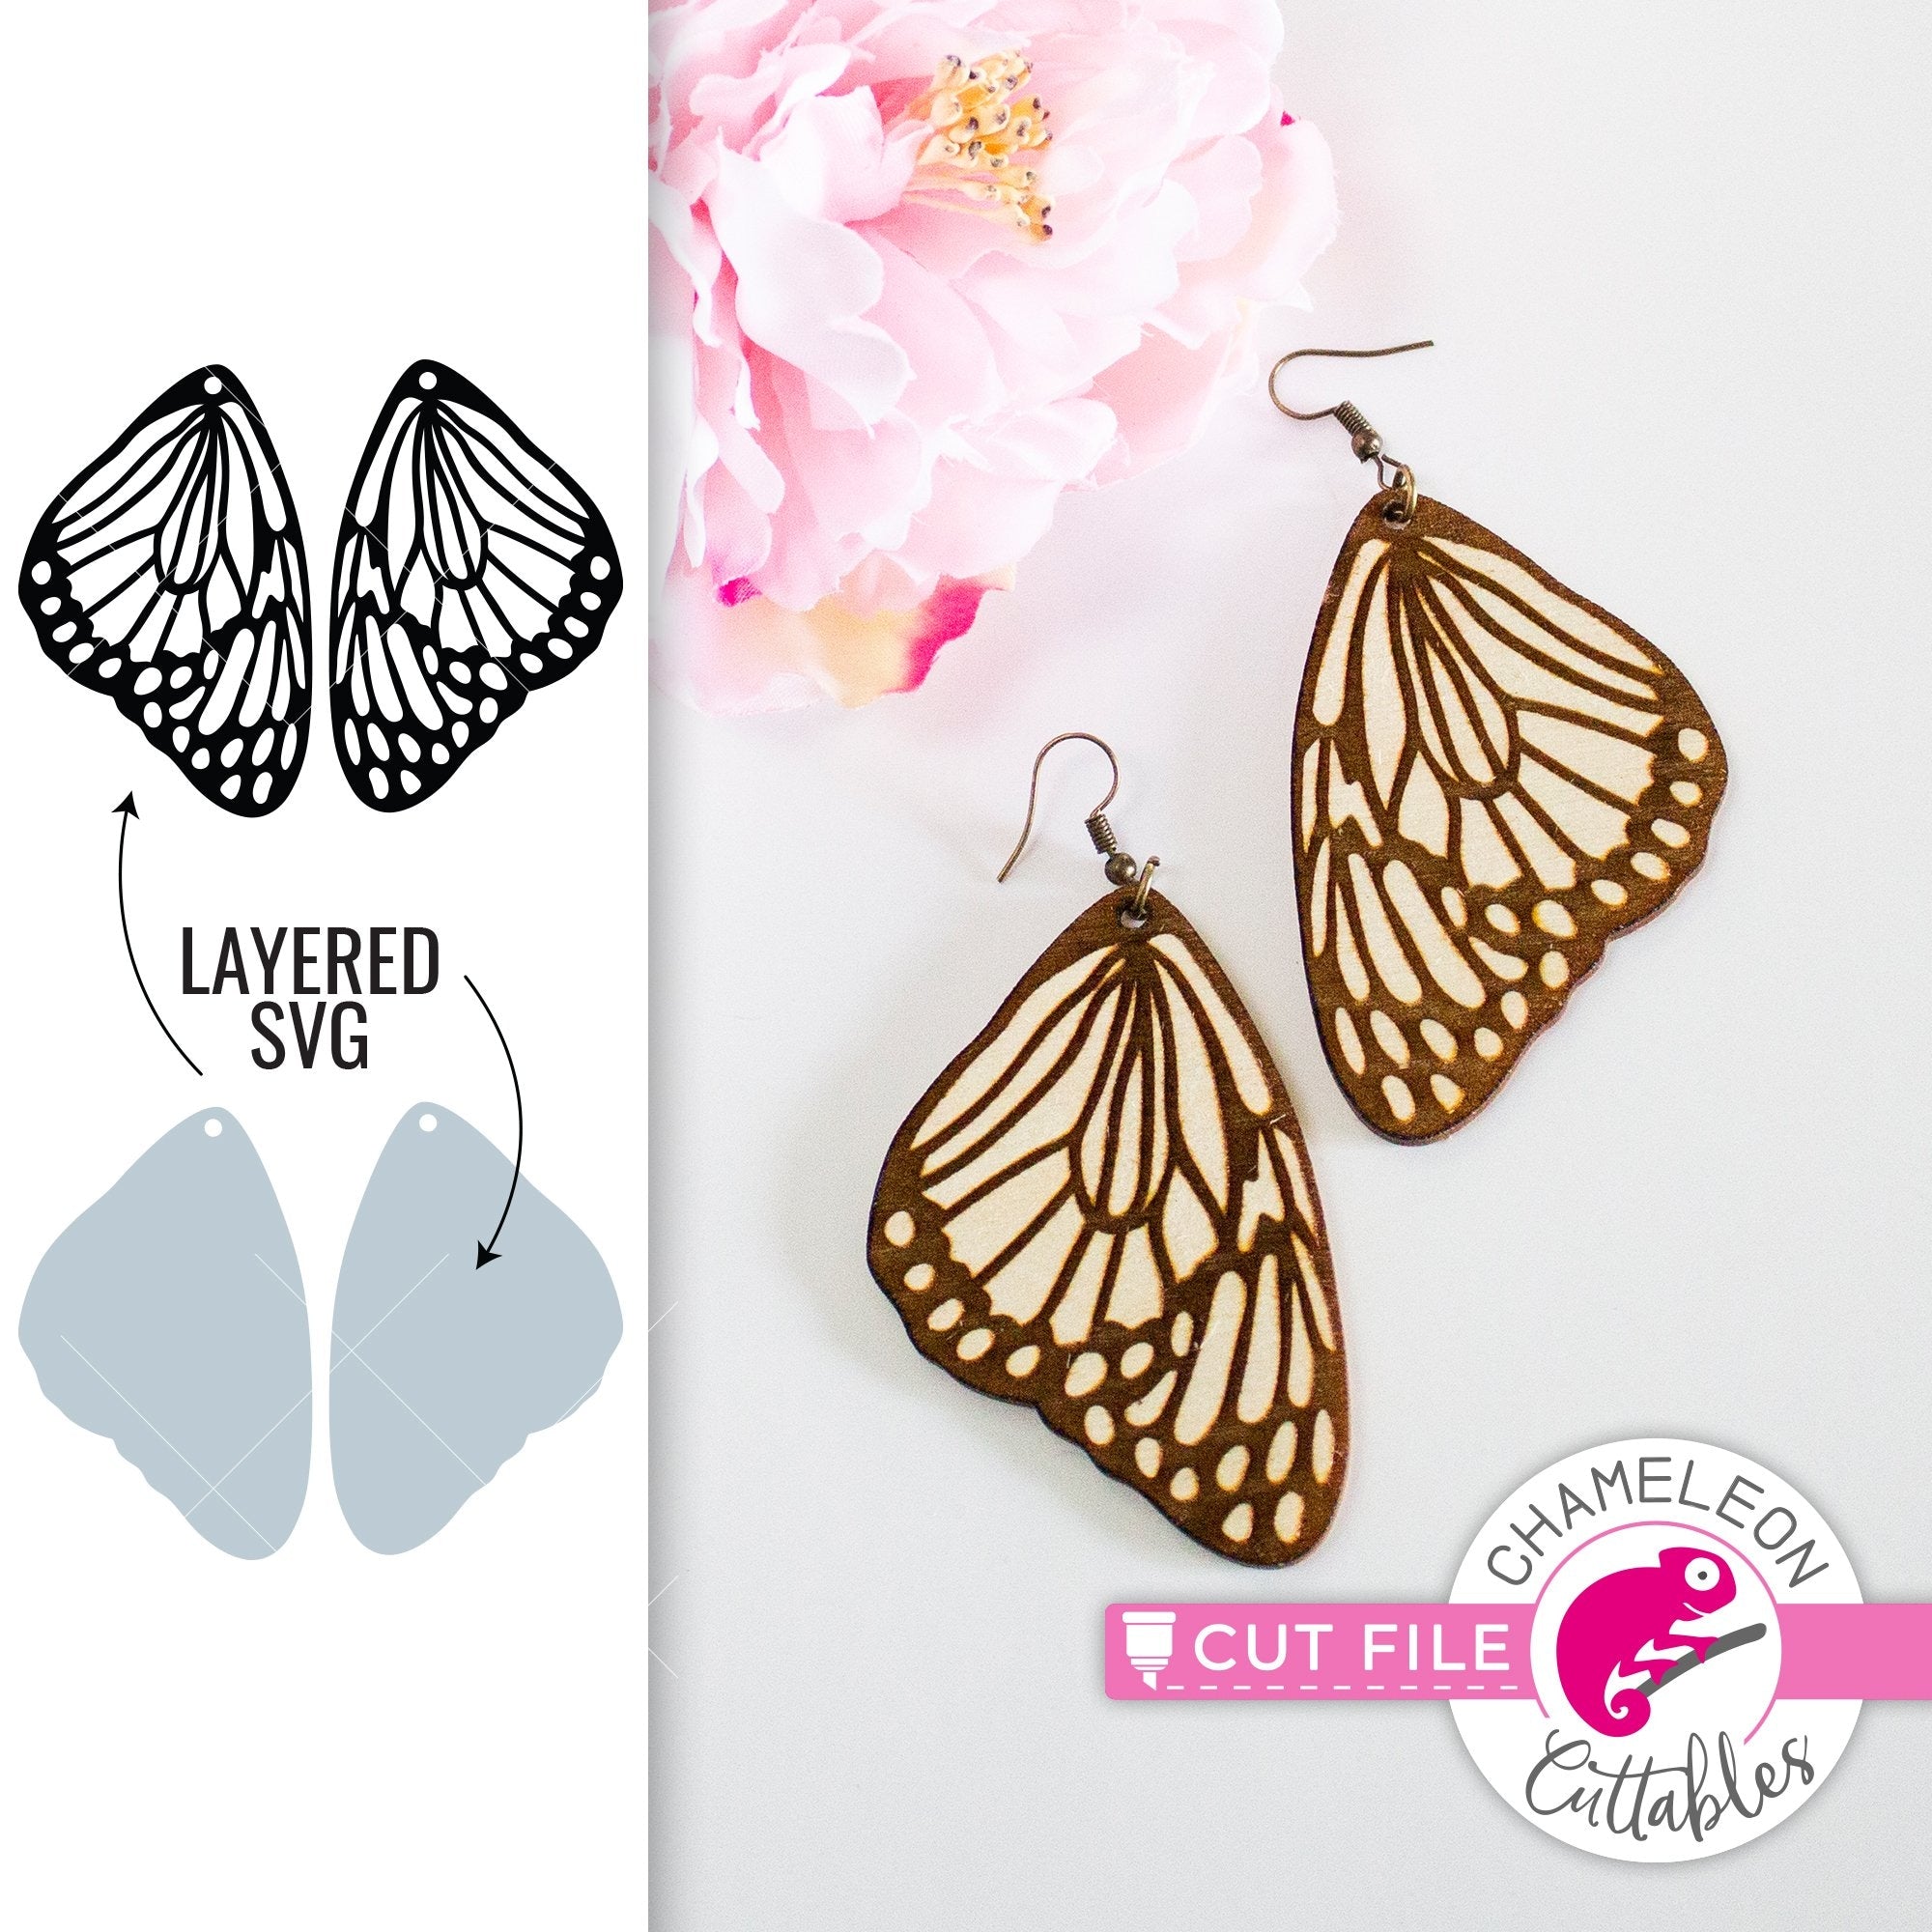 Butterfly earrings template SVG png dxf eps jpeg Chameleon Cuttables LLC